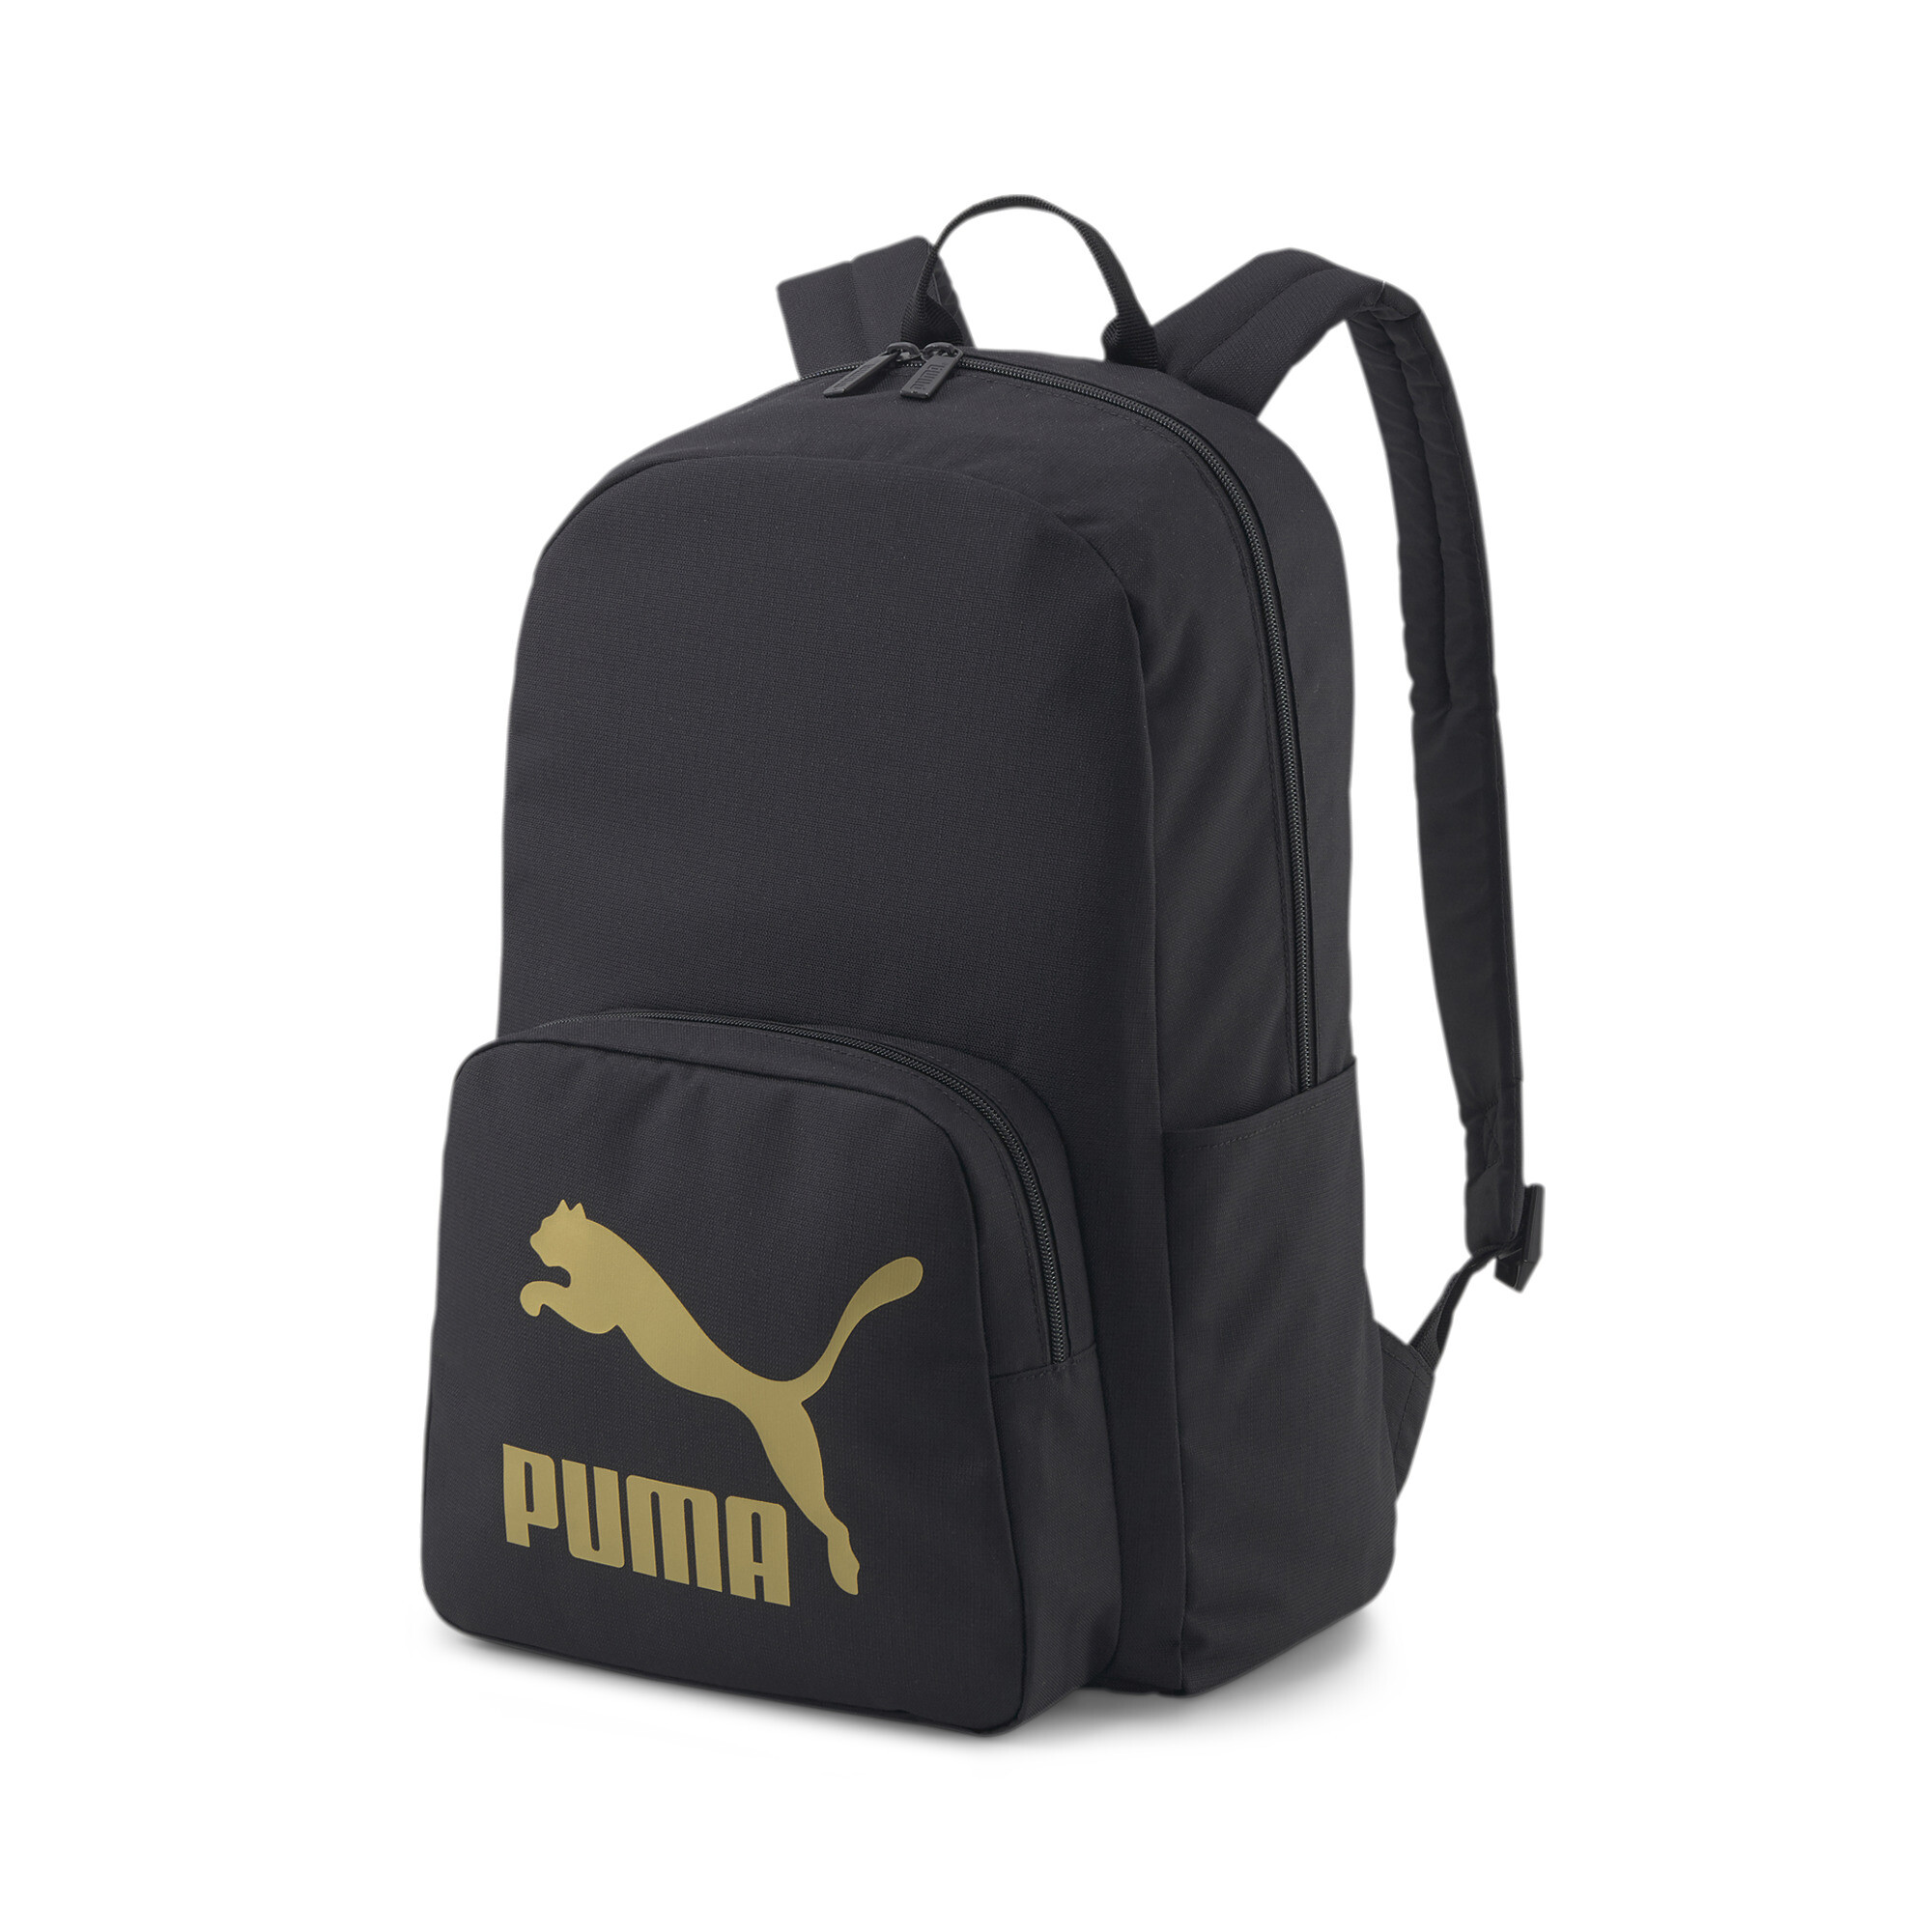 Better according to Tranquility Mochila classic archive | PUMA